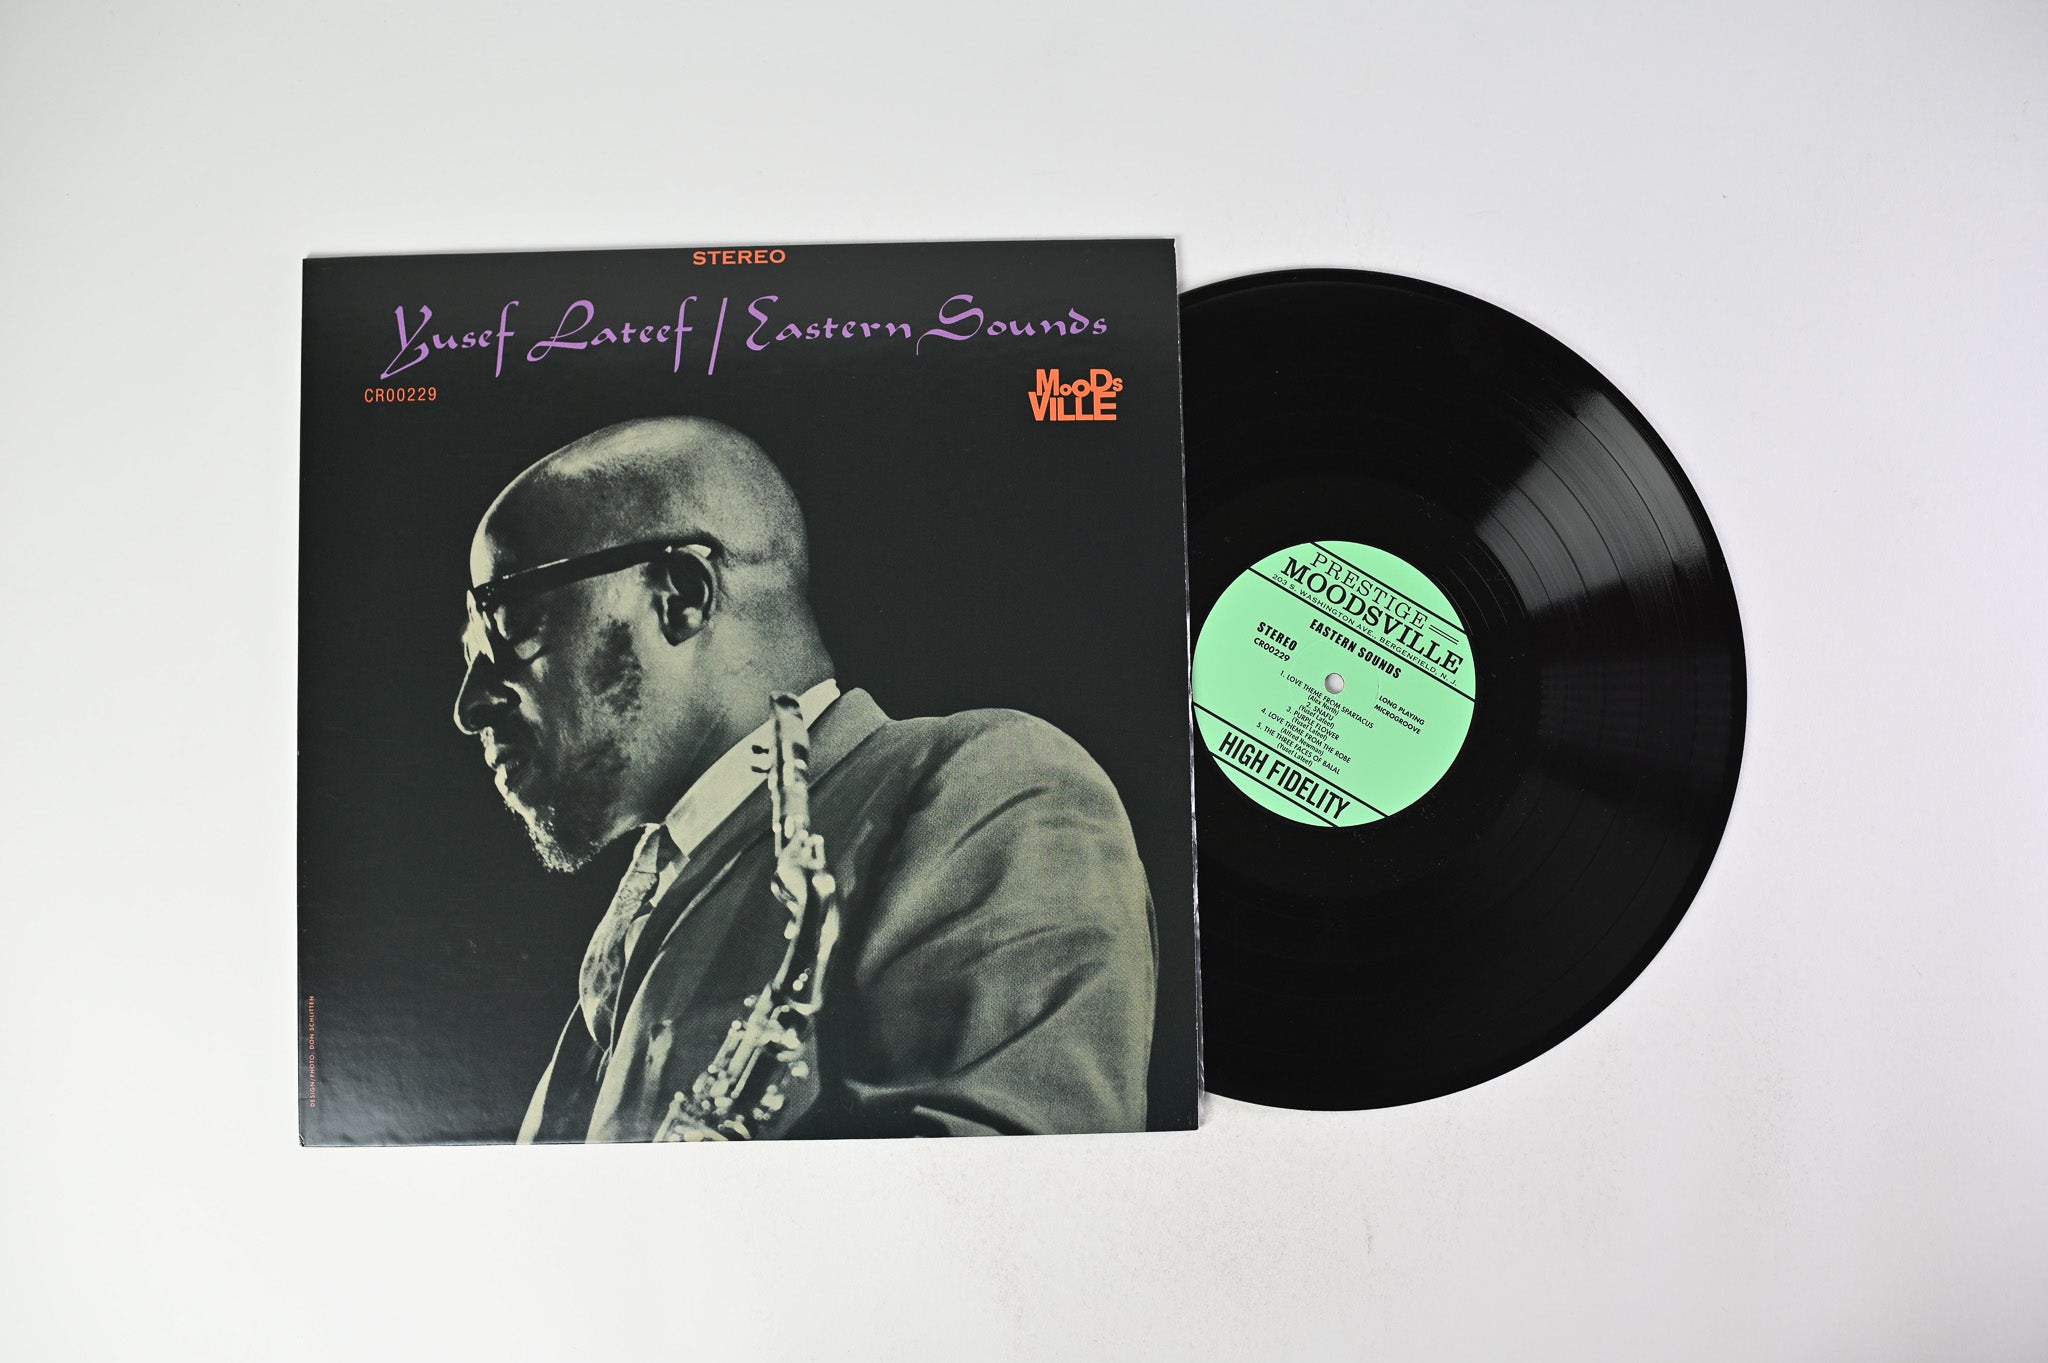 Yusef Lateef - Eastern Sounds Numbered Reissue on Craft Recordings/Moodsville